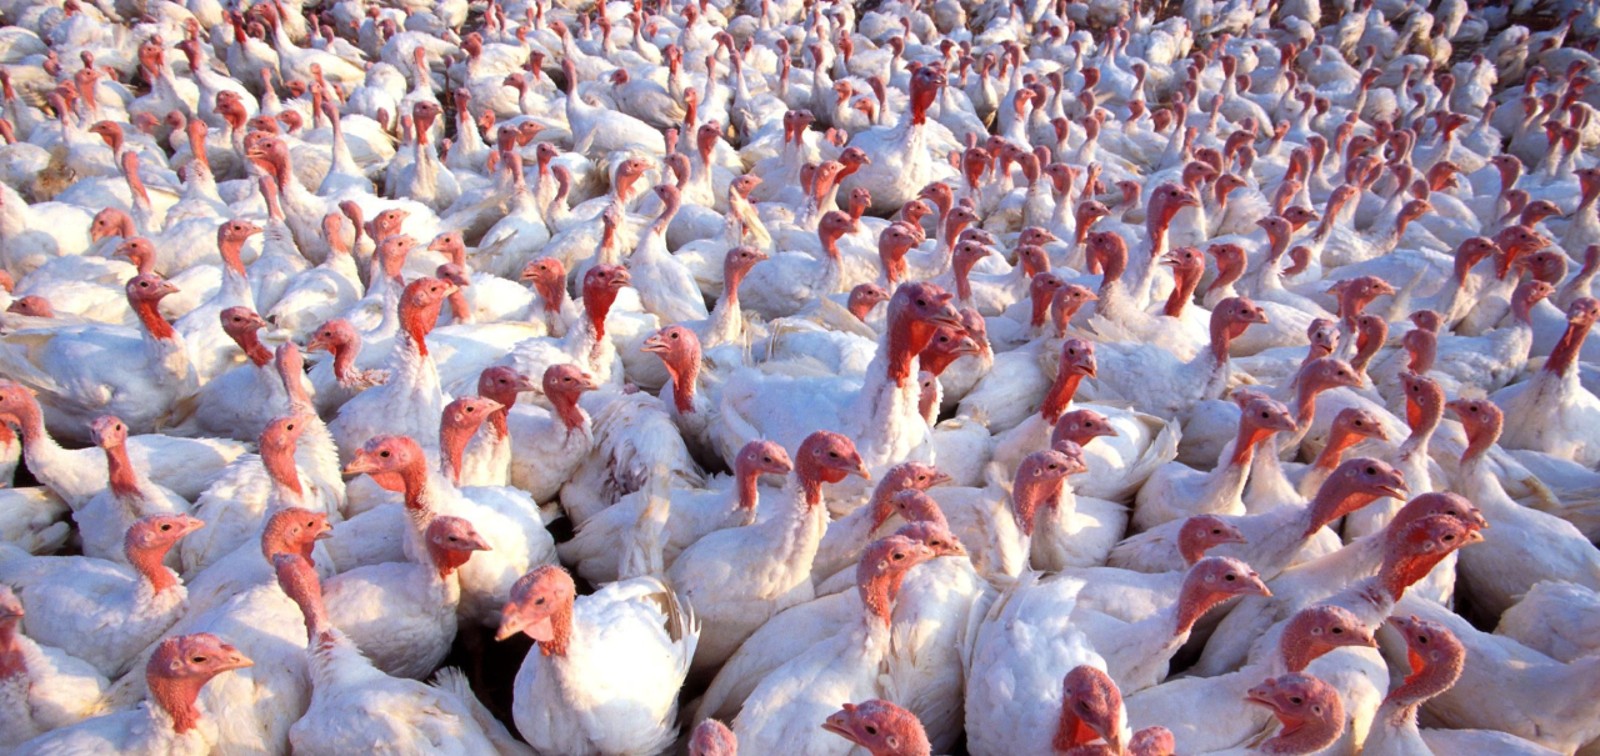 Avian Influenza: Should We Be Concerned?
